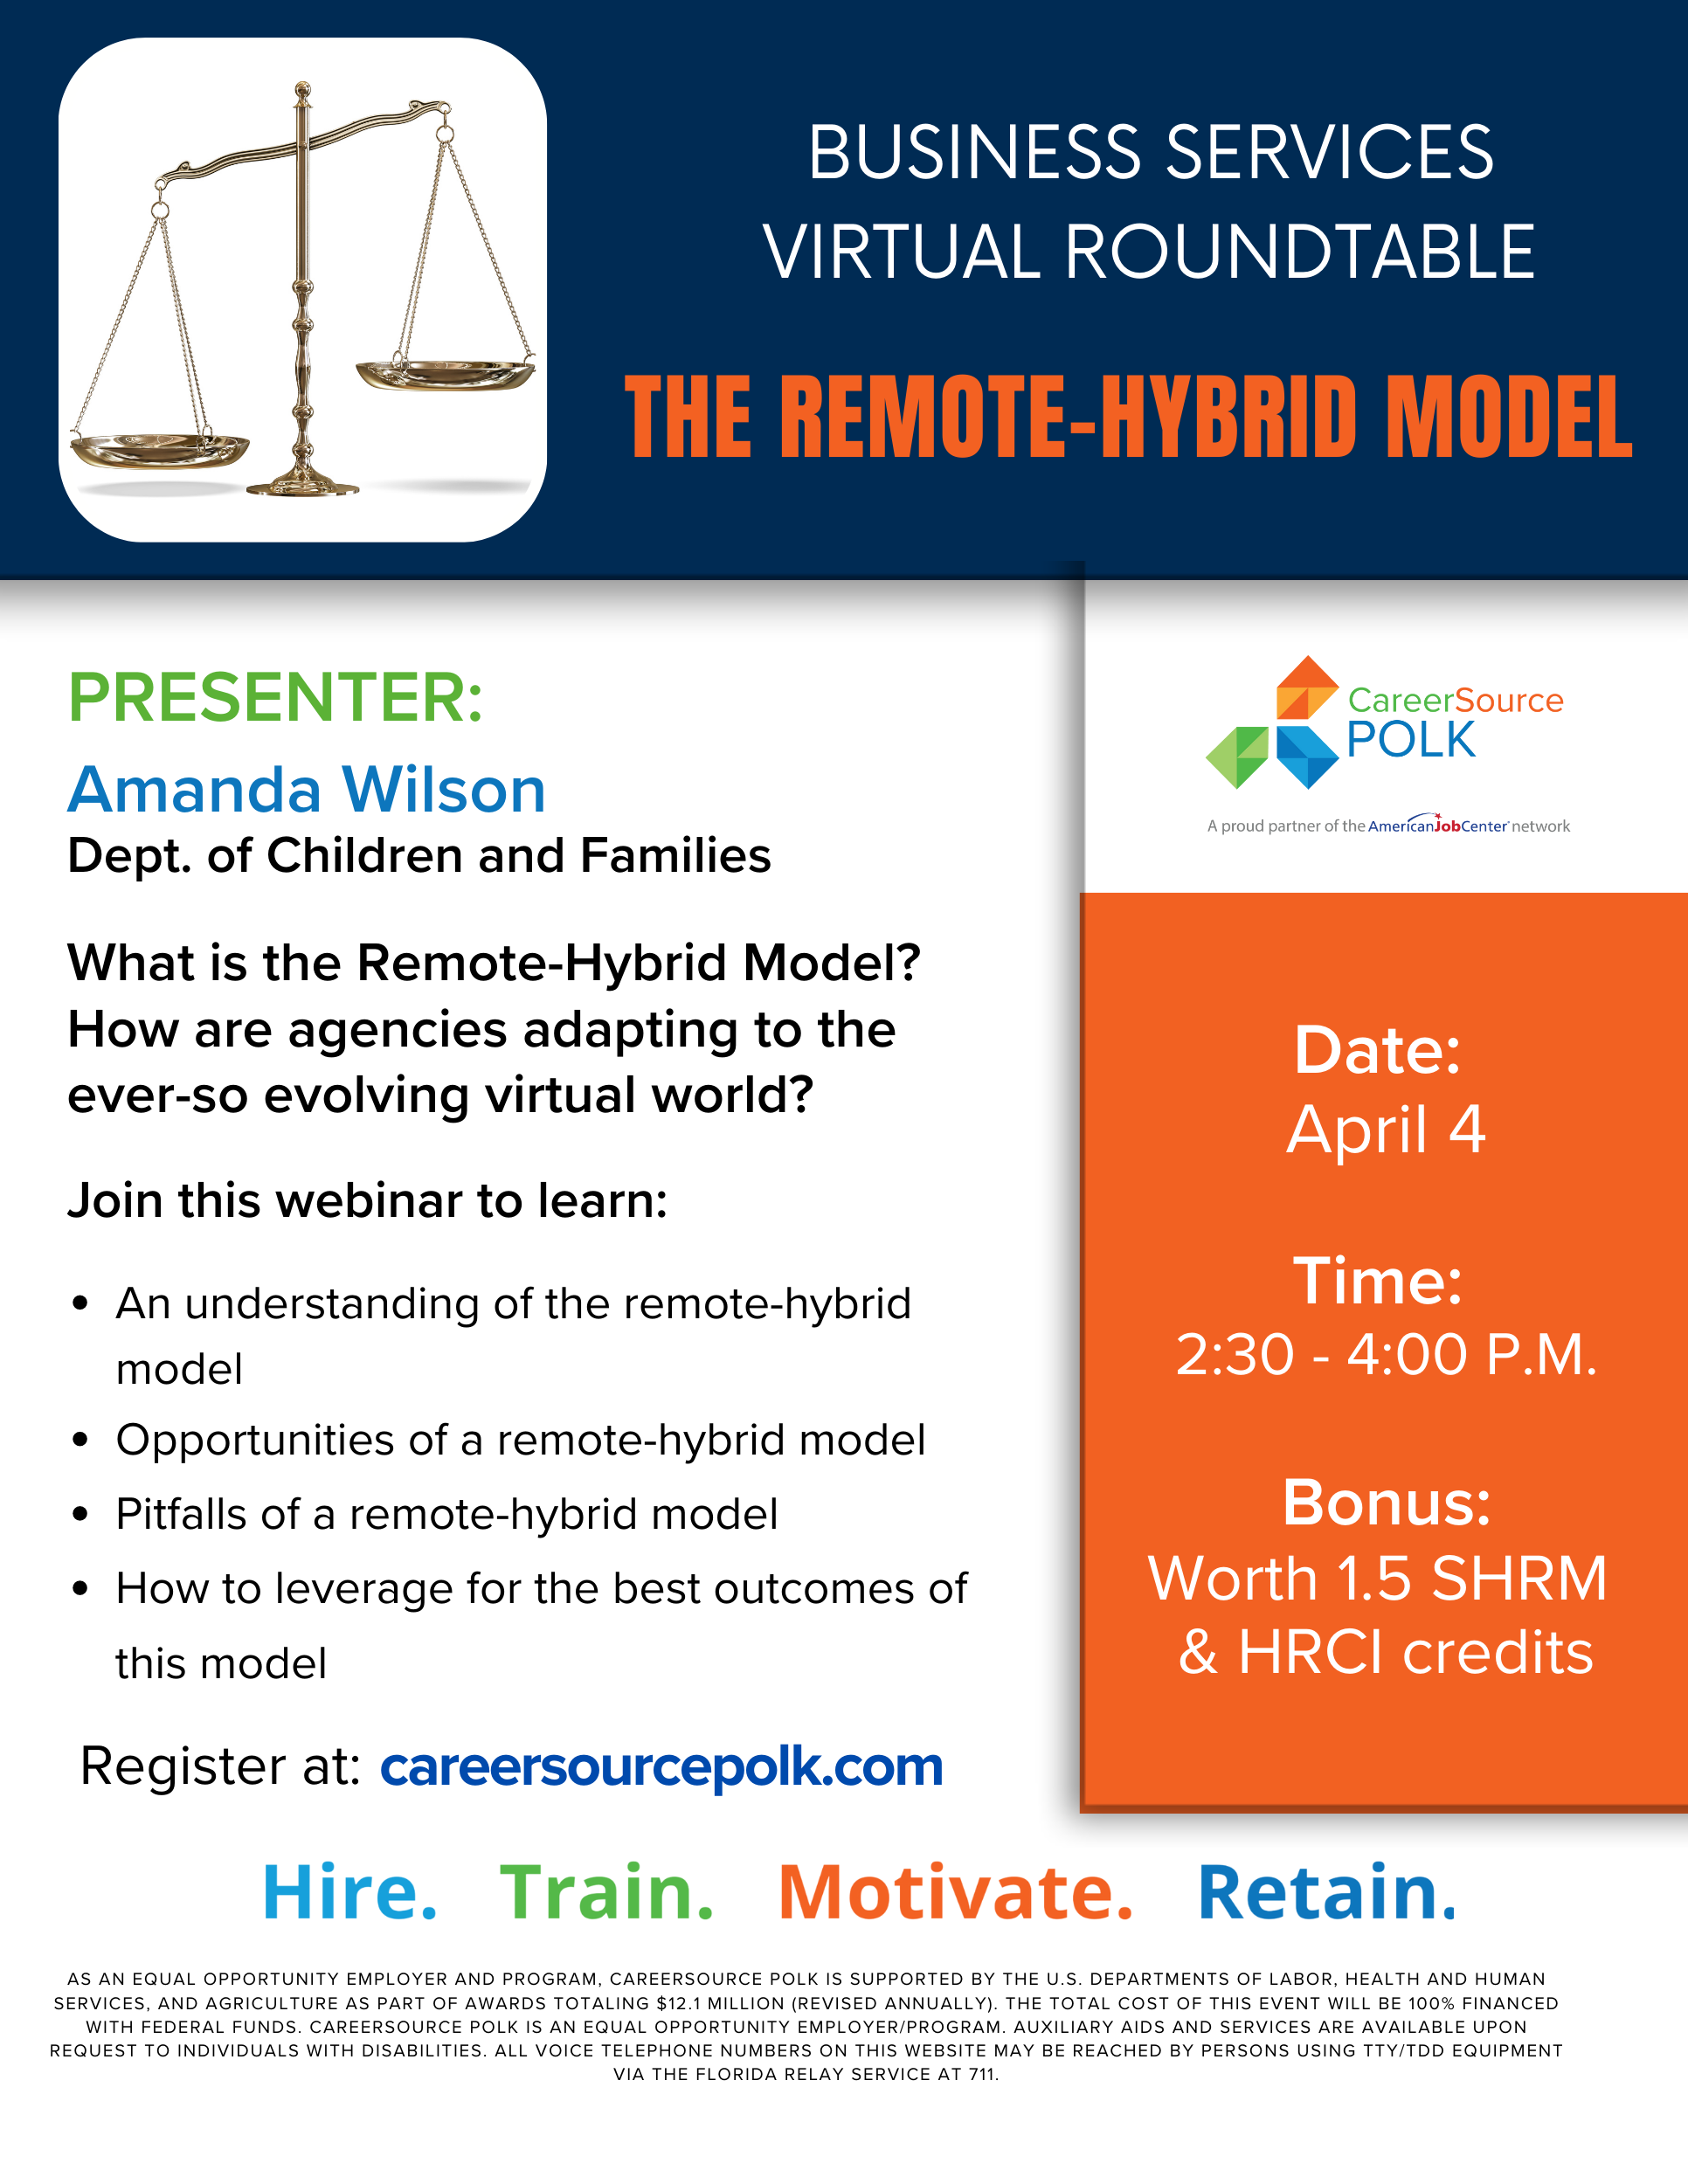 Remote-Hybrid Model Roundtable presented by Amanda Wilson of DCF